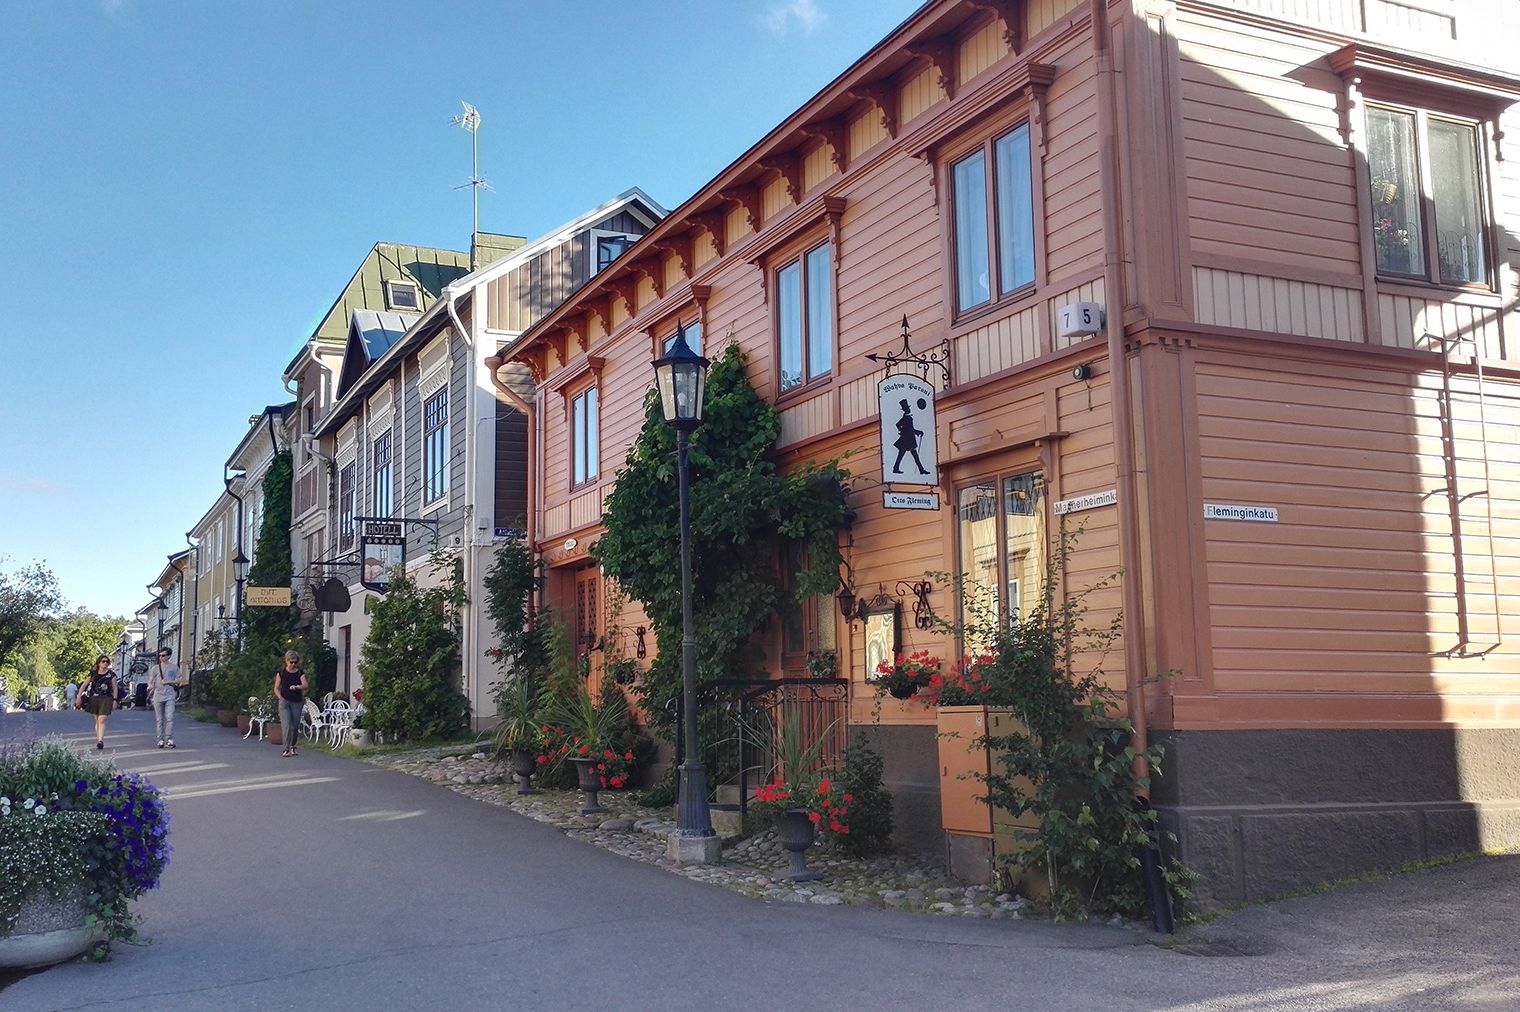 Visitors walk down a street in Naantali, lined with colourful wooden houses.